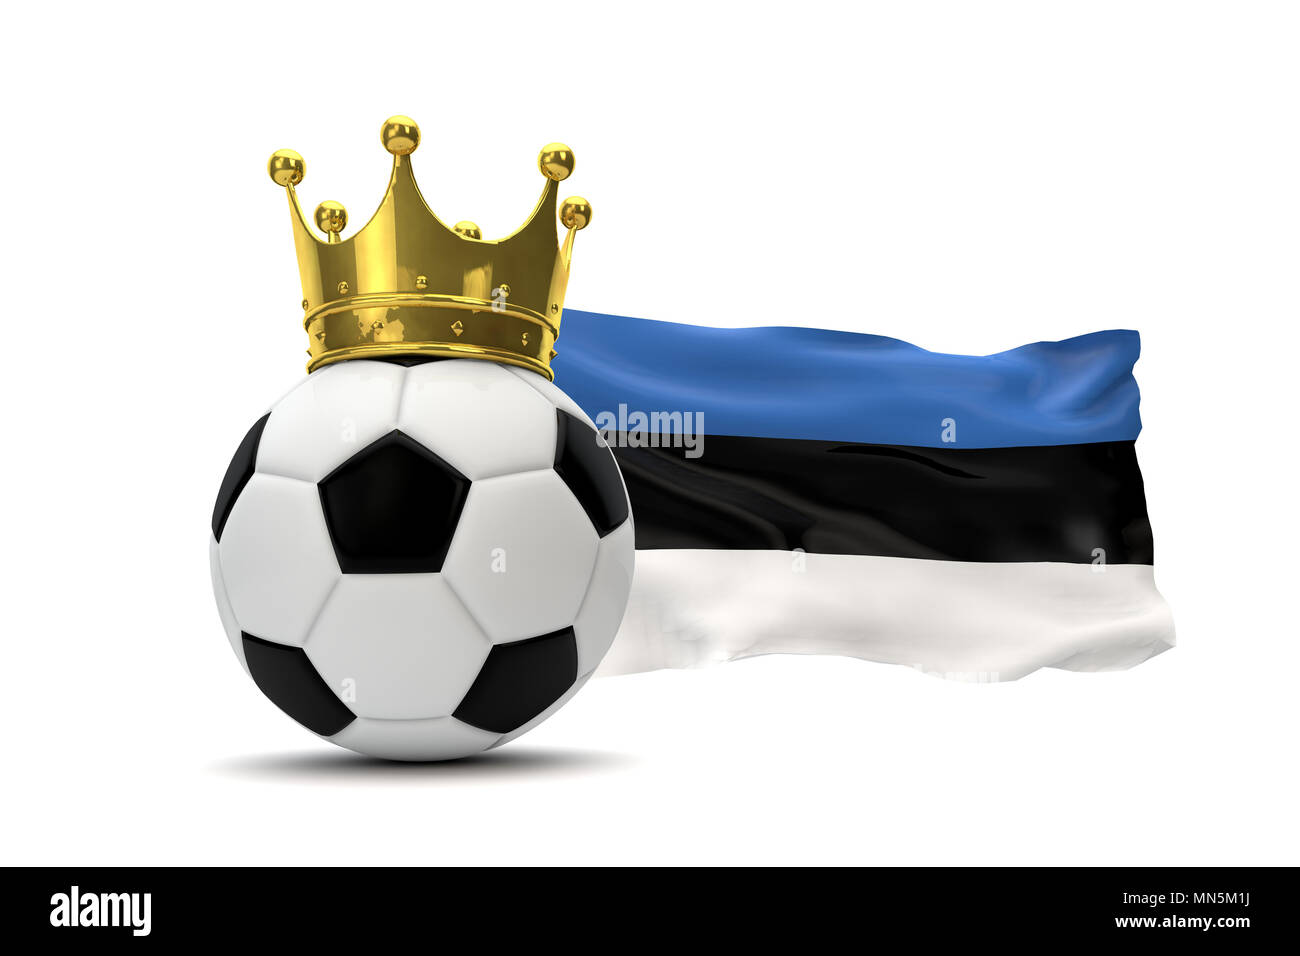 Estonia flag and soccer ball with gold crown. 3D Rendering Stock Photo